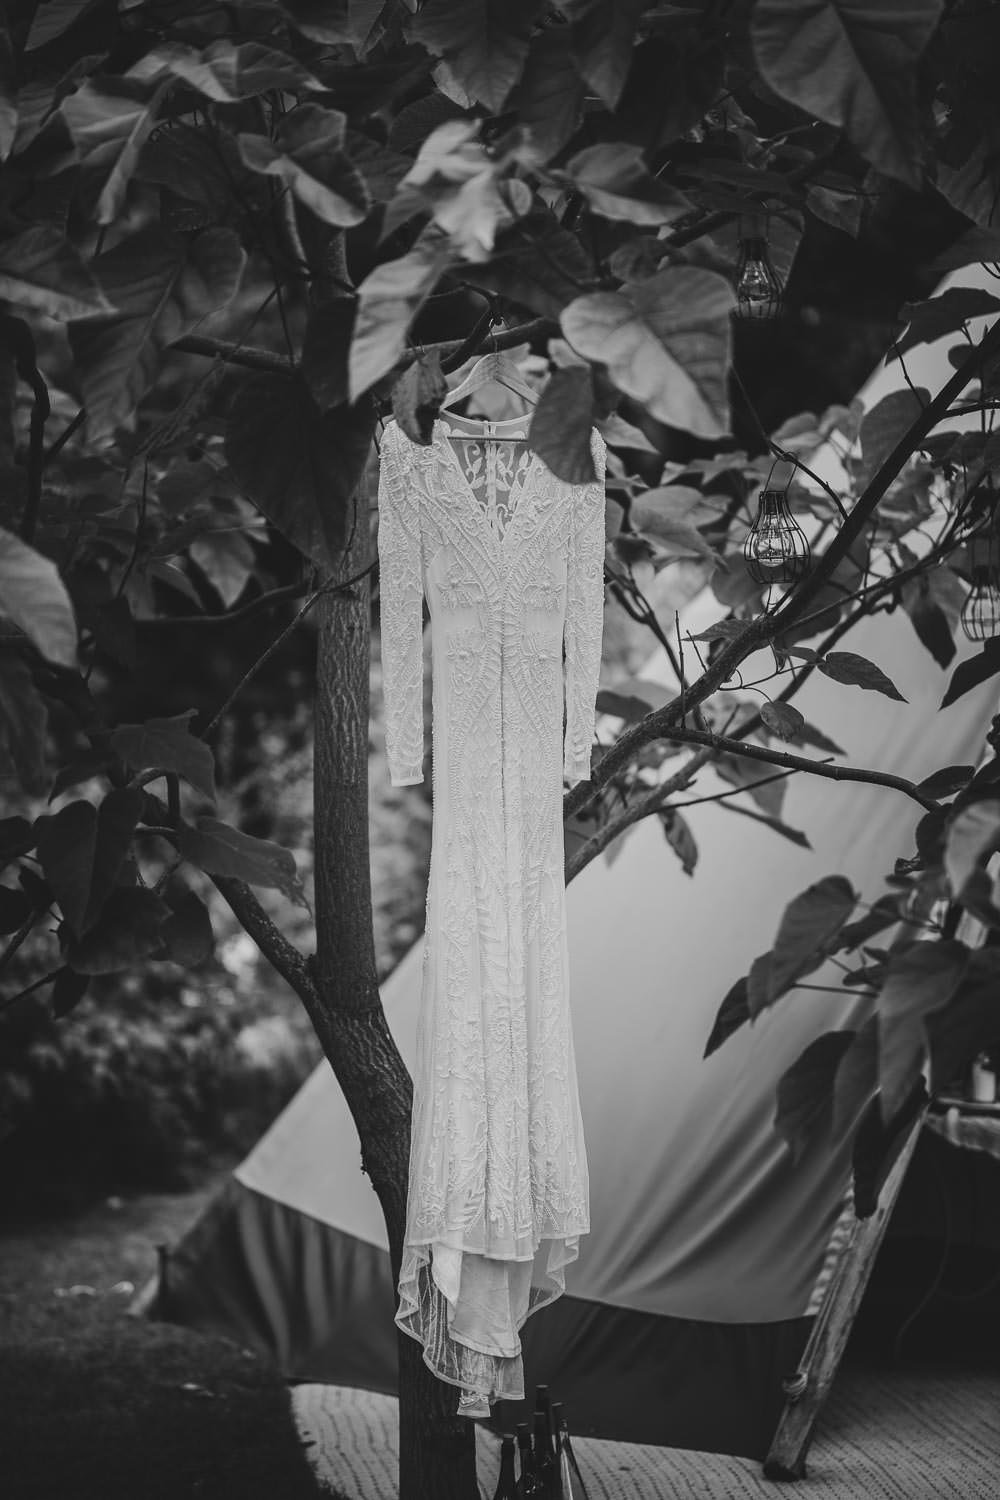 Lace wedding dress hanging on display amongst green foliage and trees